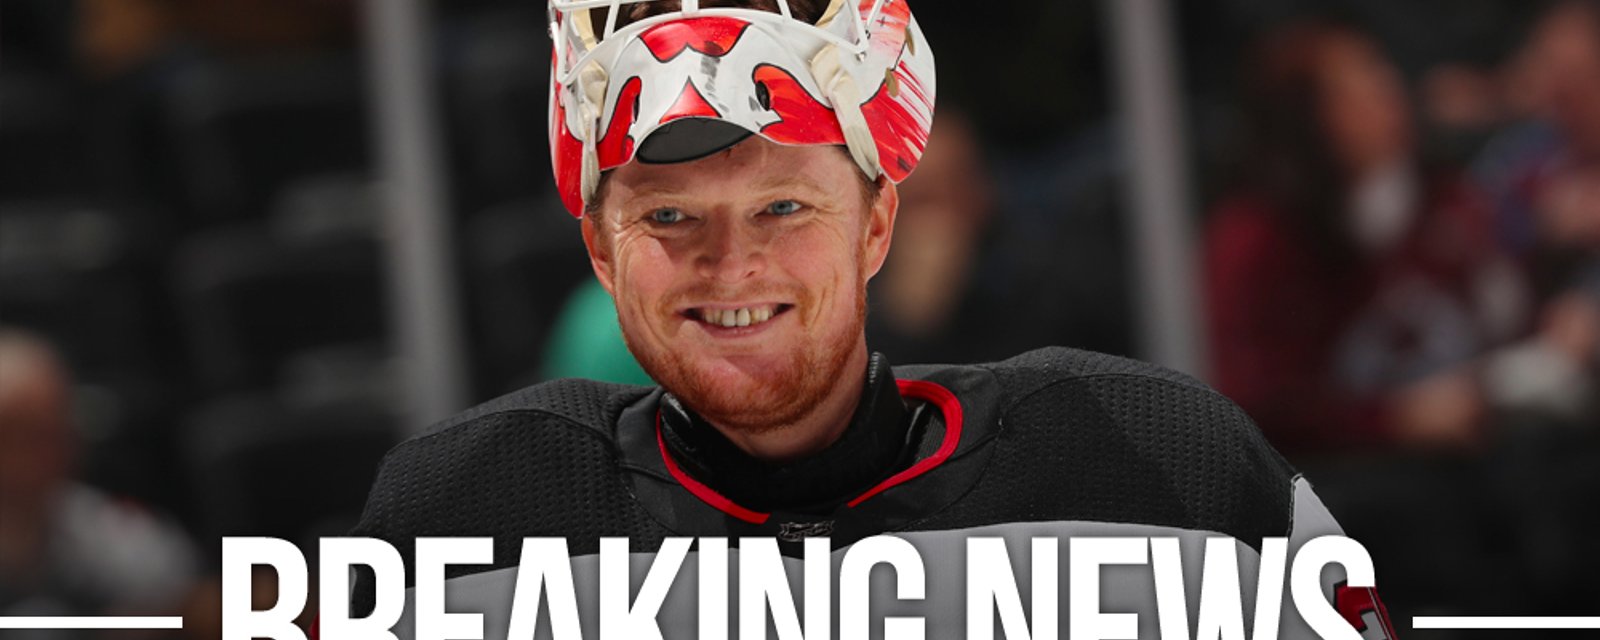 Cory Schneider gets a second chance at the NHL, signs one year deal in free agency